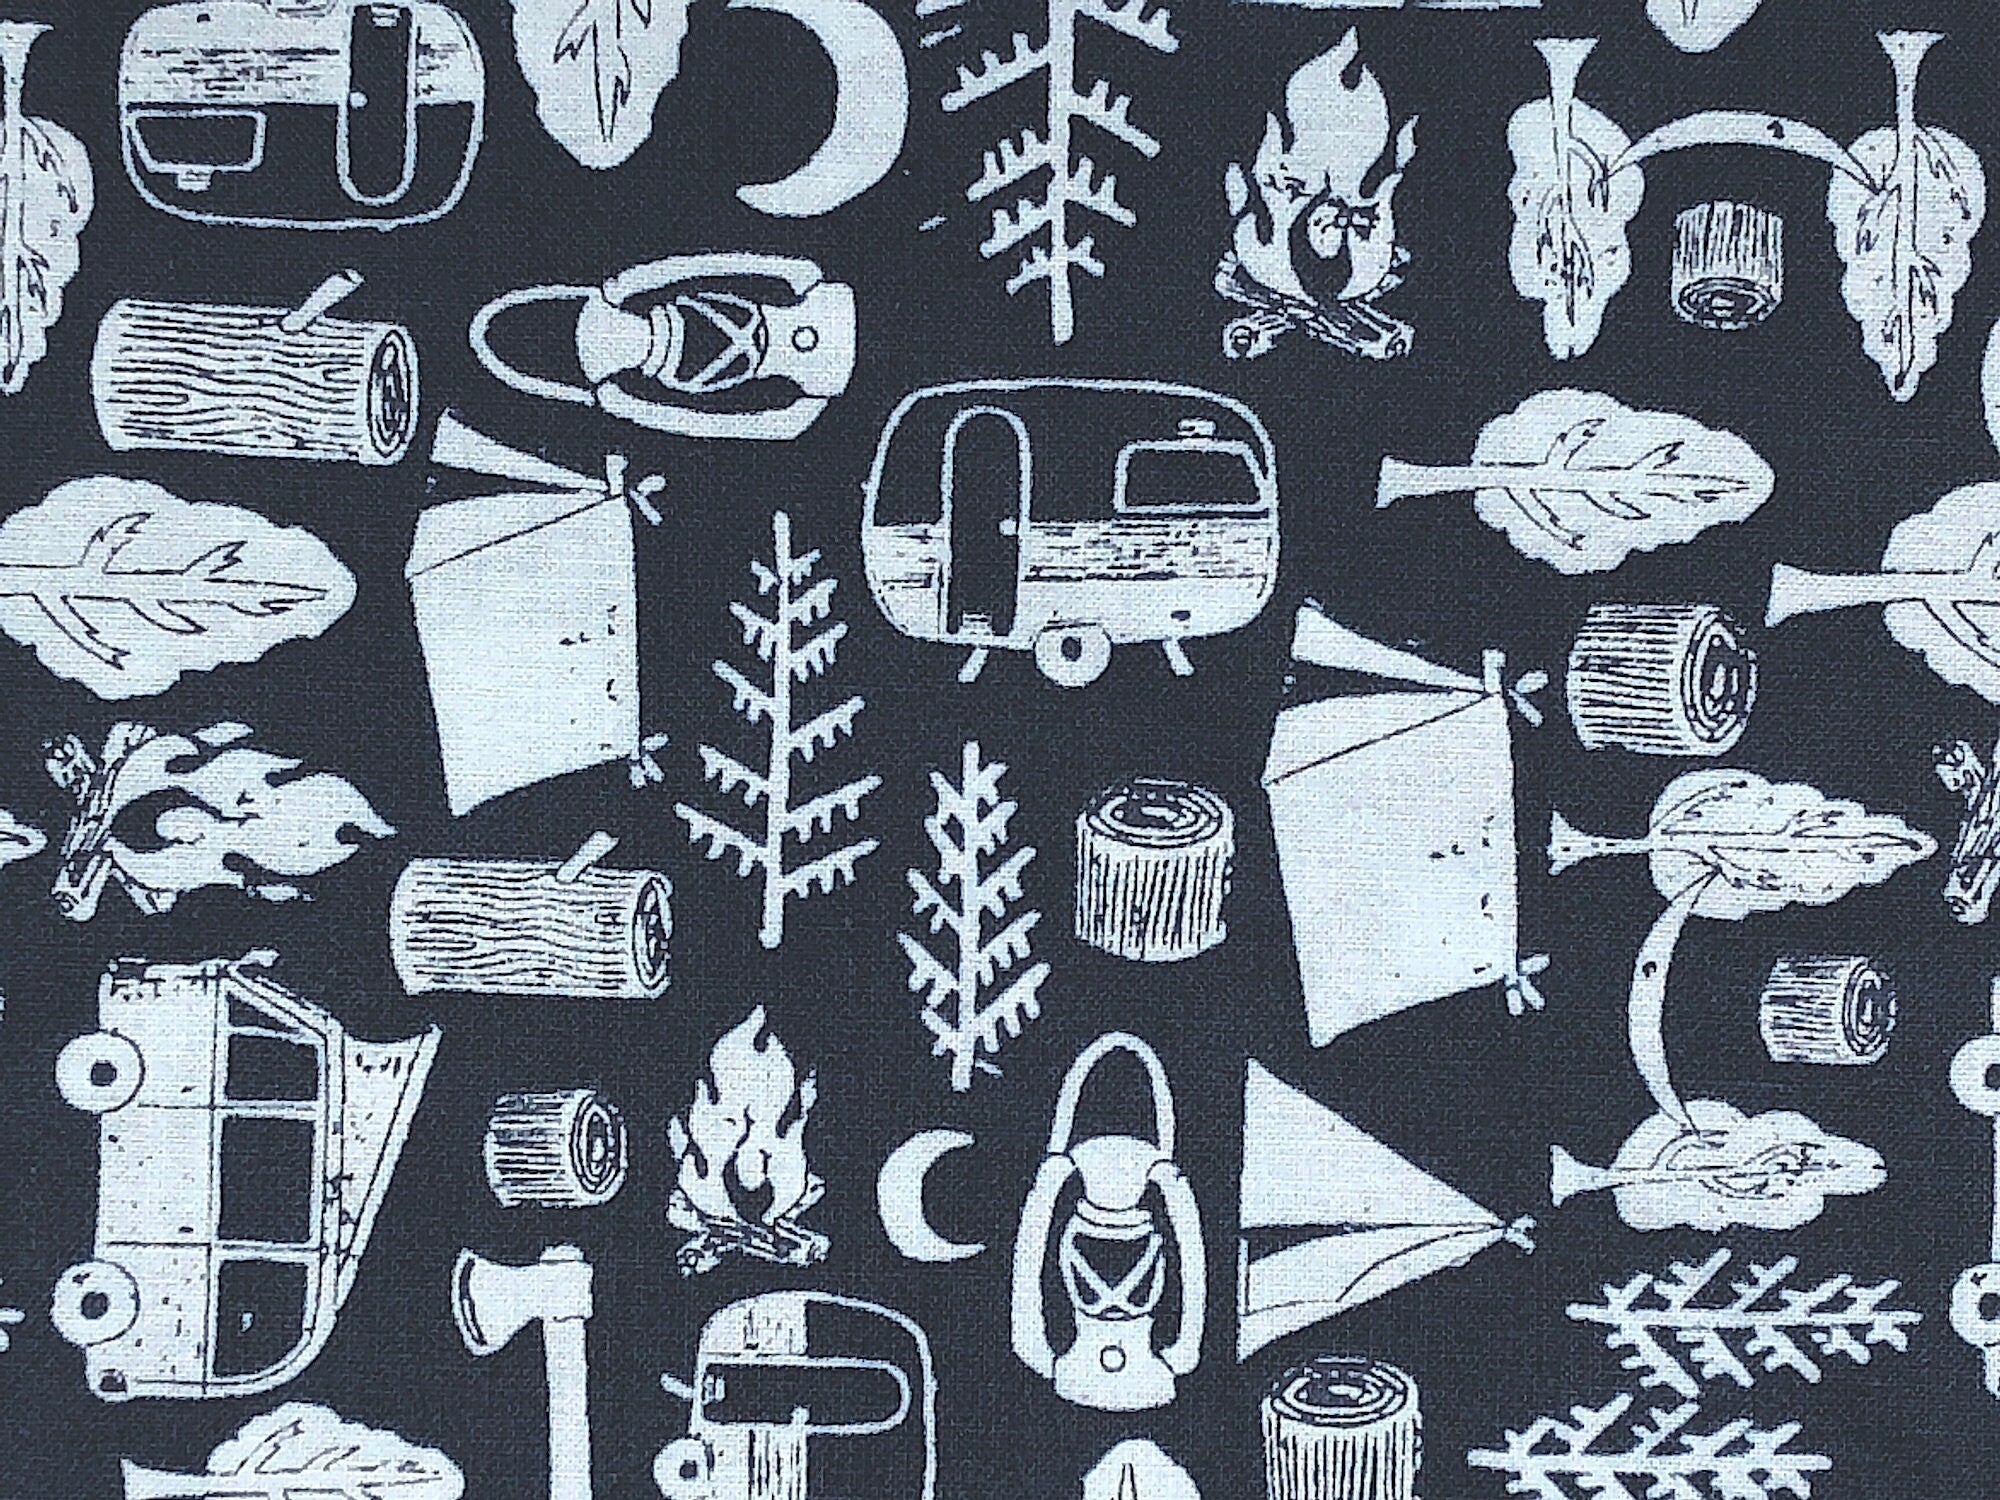 This fabric is covered with tents, trees, lanterns, travel trailers and more. This Midnight Camping fabric has a blue background.